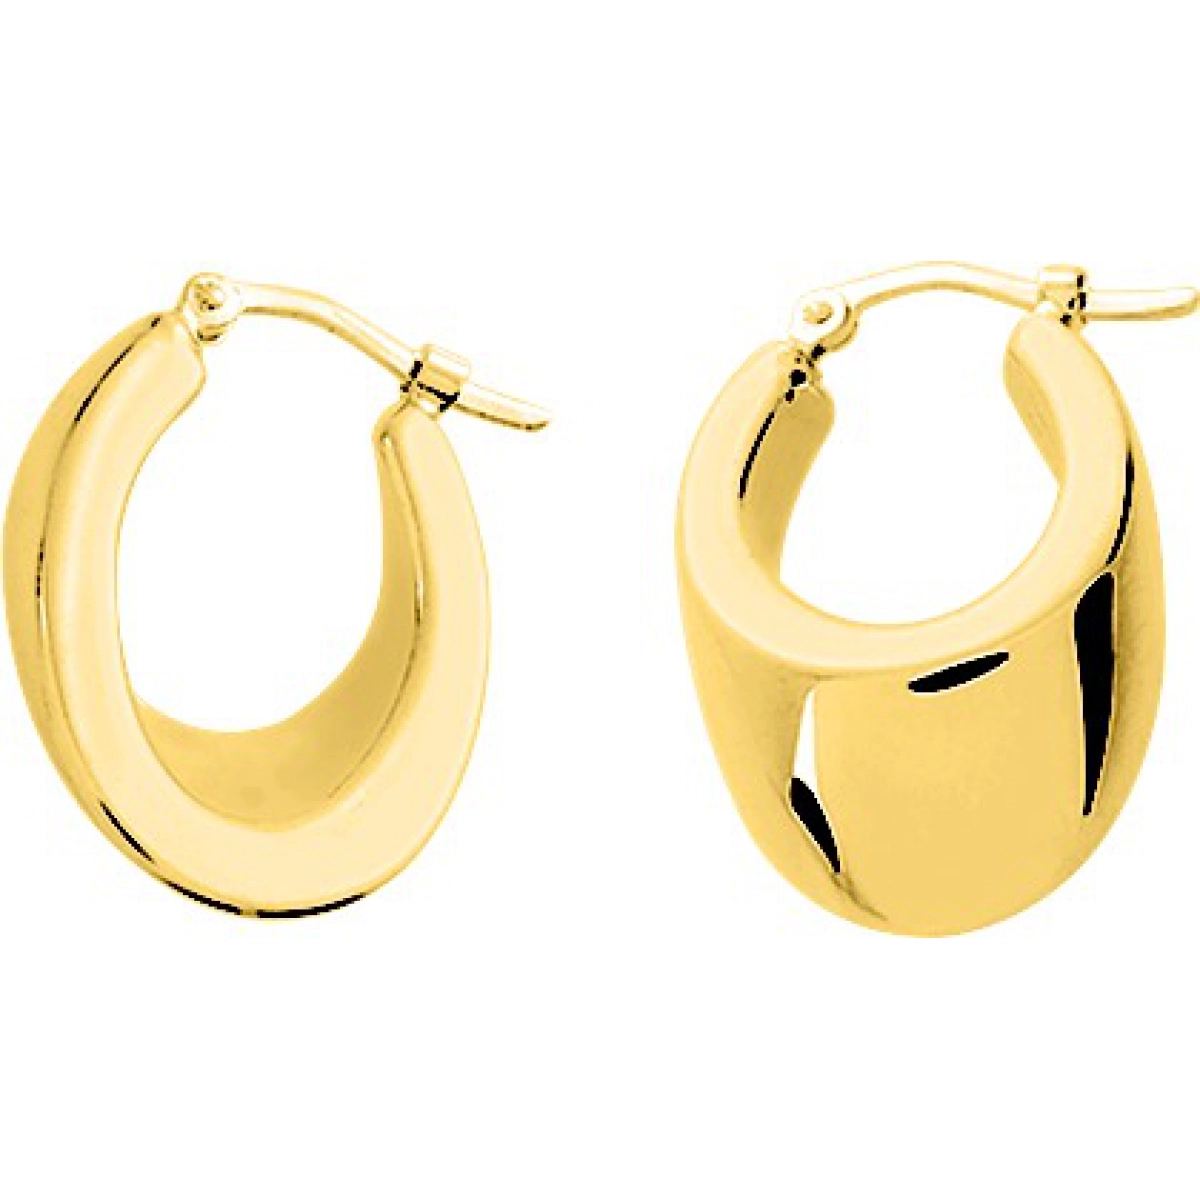 Earrings pair electroformed gold plated Brass  Lua Blanca  135554.0